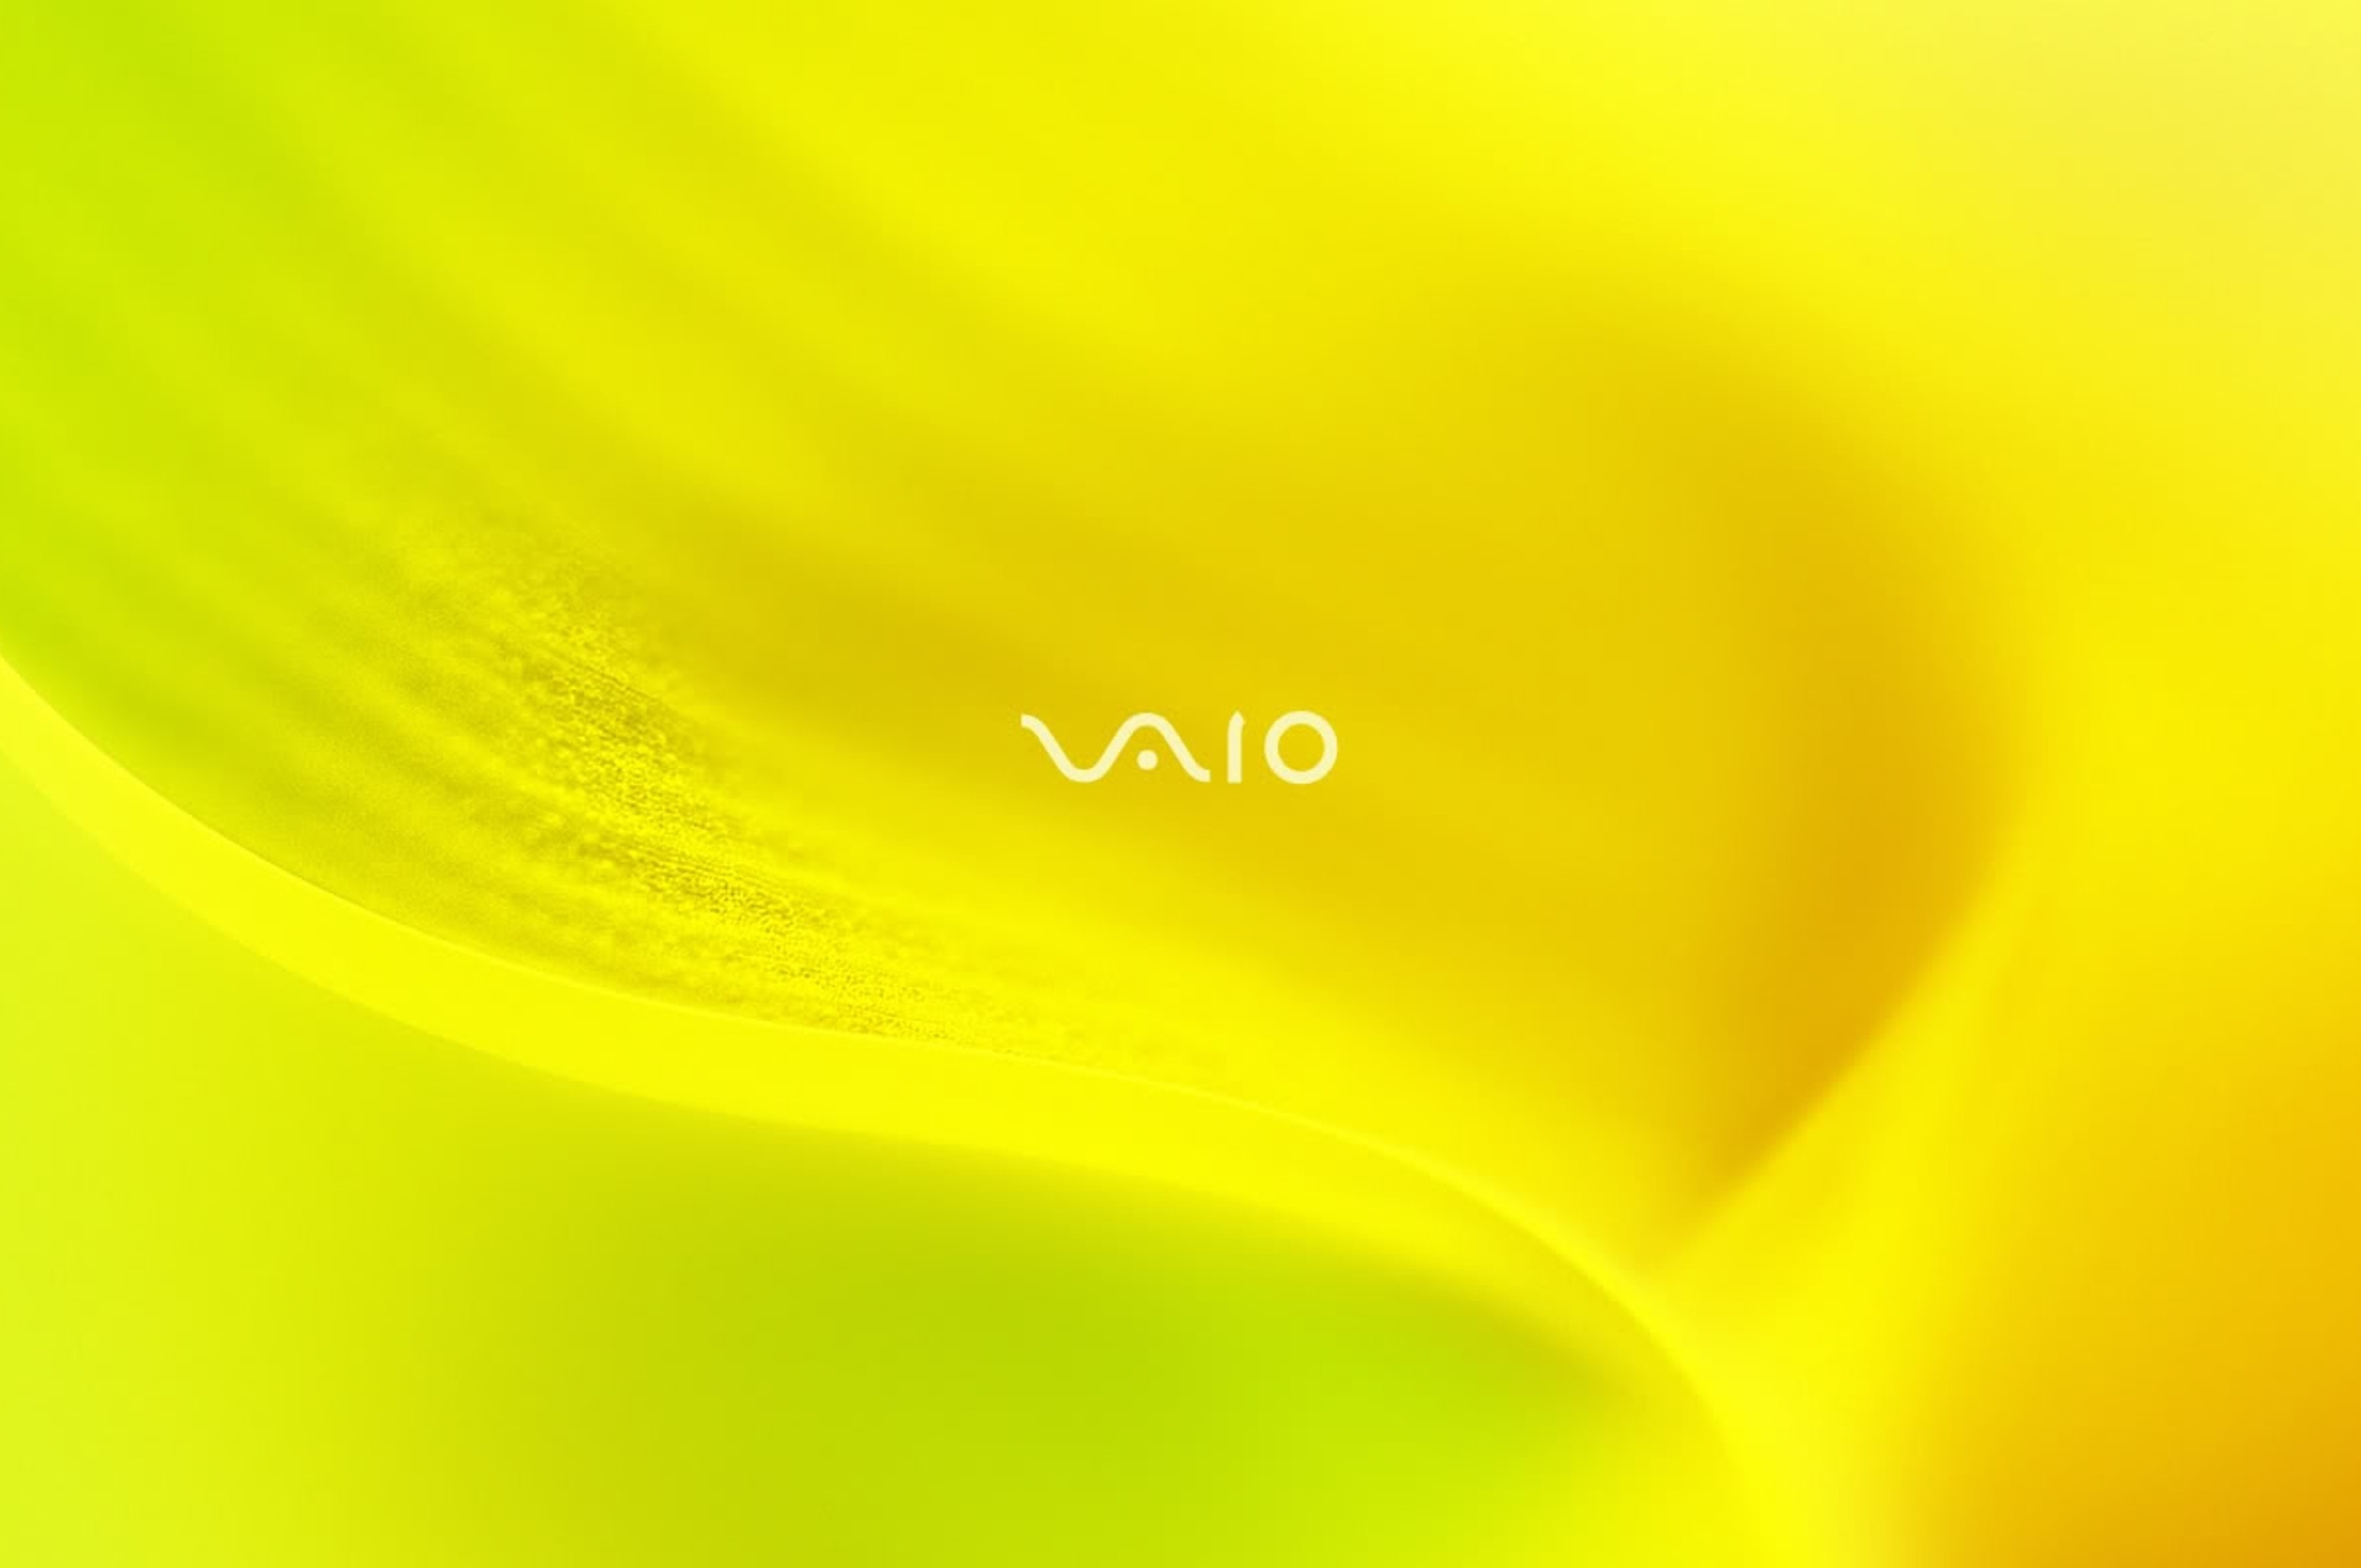 2560x1700 Sony Vaio Yellow System Chromebook Pixel Wallpaper Hd Hi Tech 4k Wallpapers Images Photos And Background